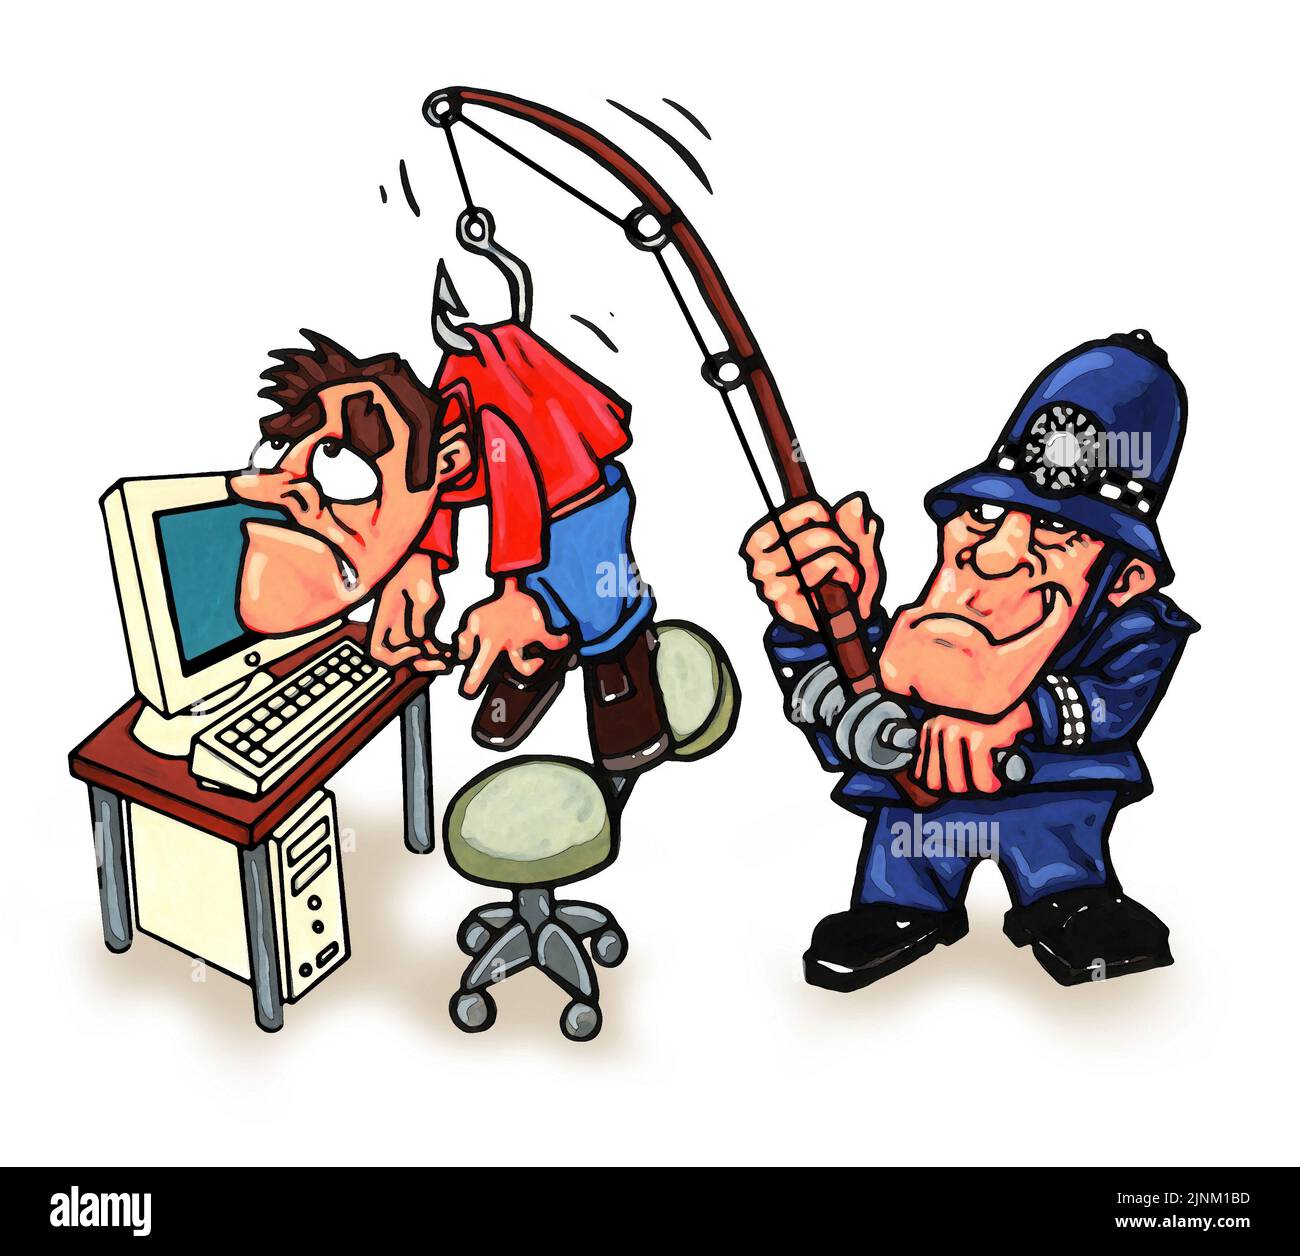 Concept art cyber criminal /hacker /internet fraud /phishing attacker caught by police illustrating efforts to end cyber crime & improve online safety Stock Photo